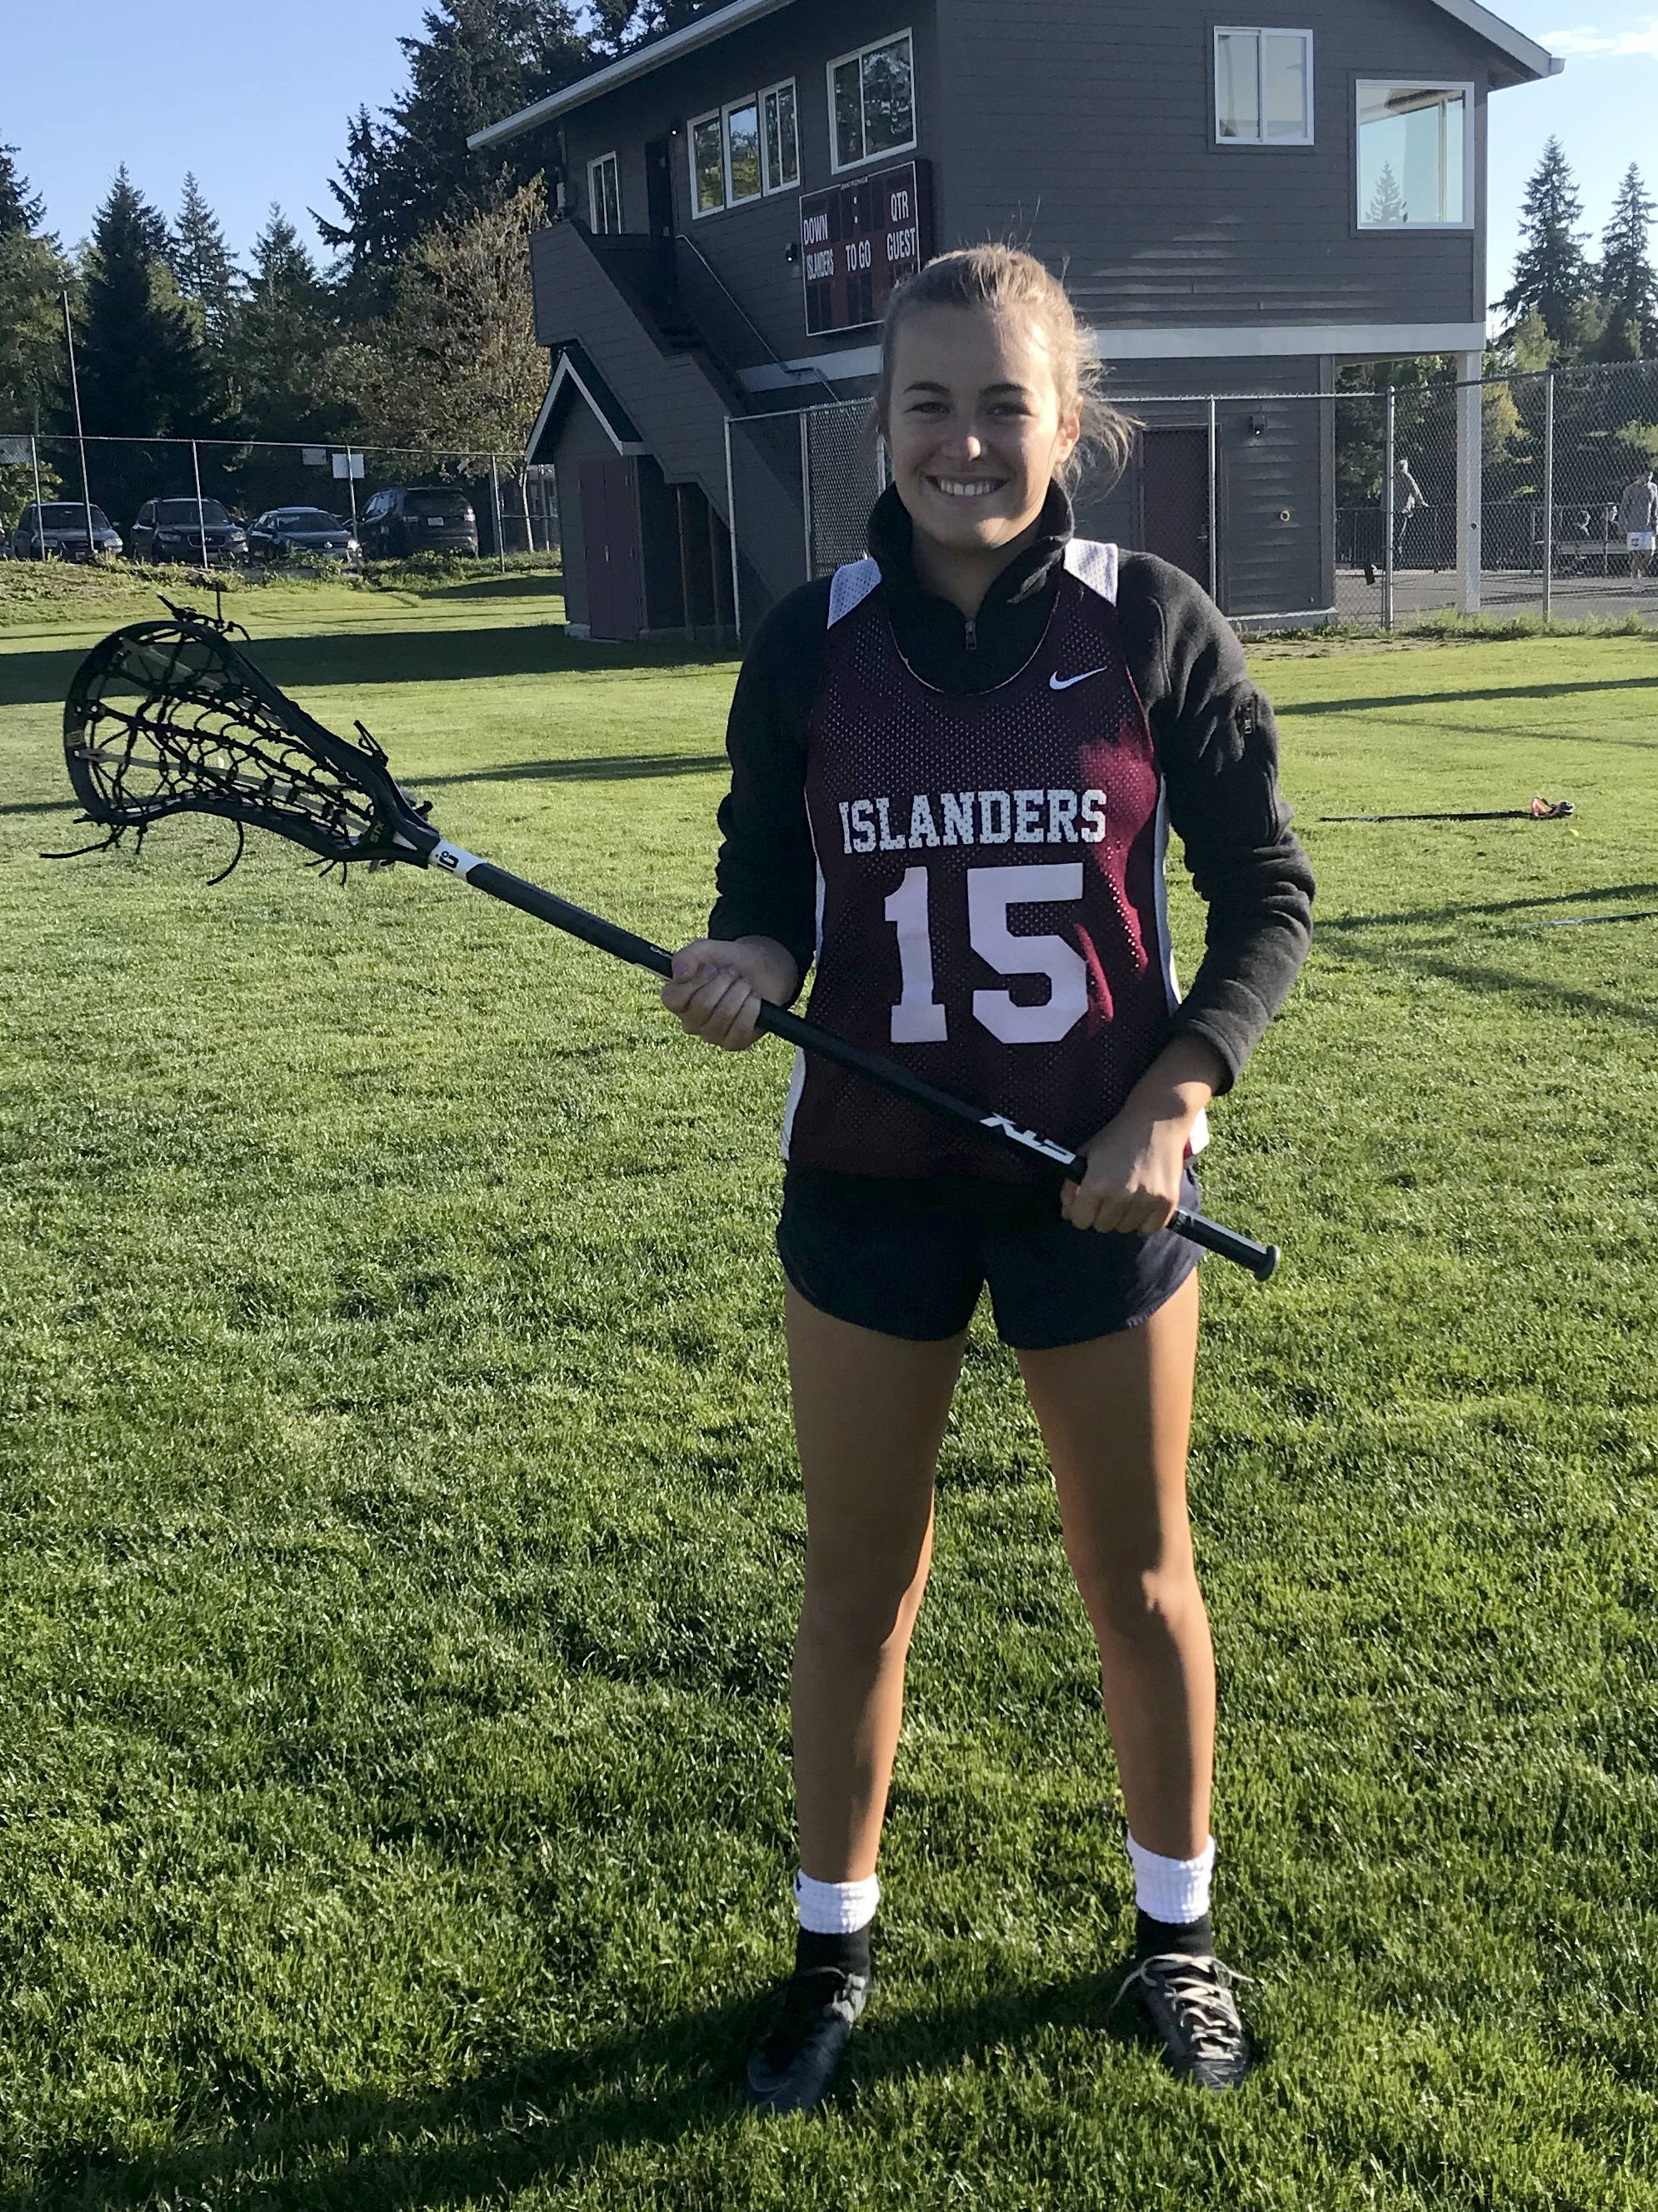 Mercer Island Islanders senior defender Julia Nordstrom, who will attend the University of Colorado (Boulder) this fall, plans on playing on the college’s club lacrosse team next season. Shaun Scott/staff photo